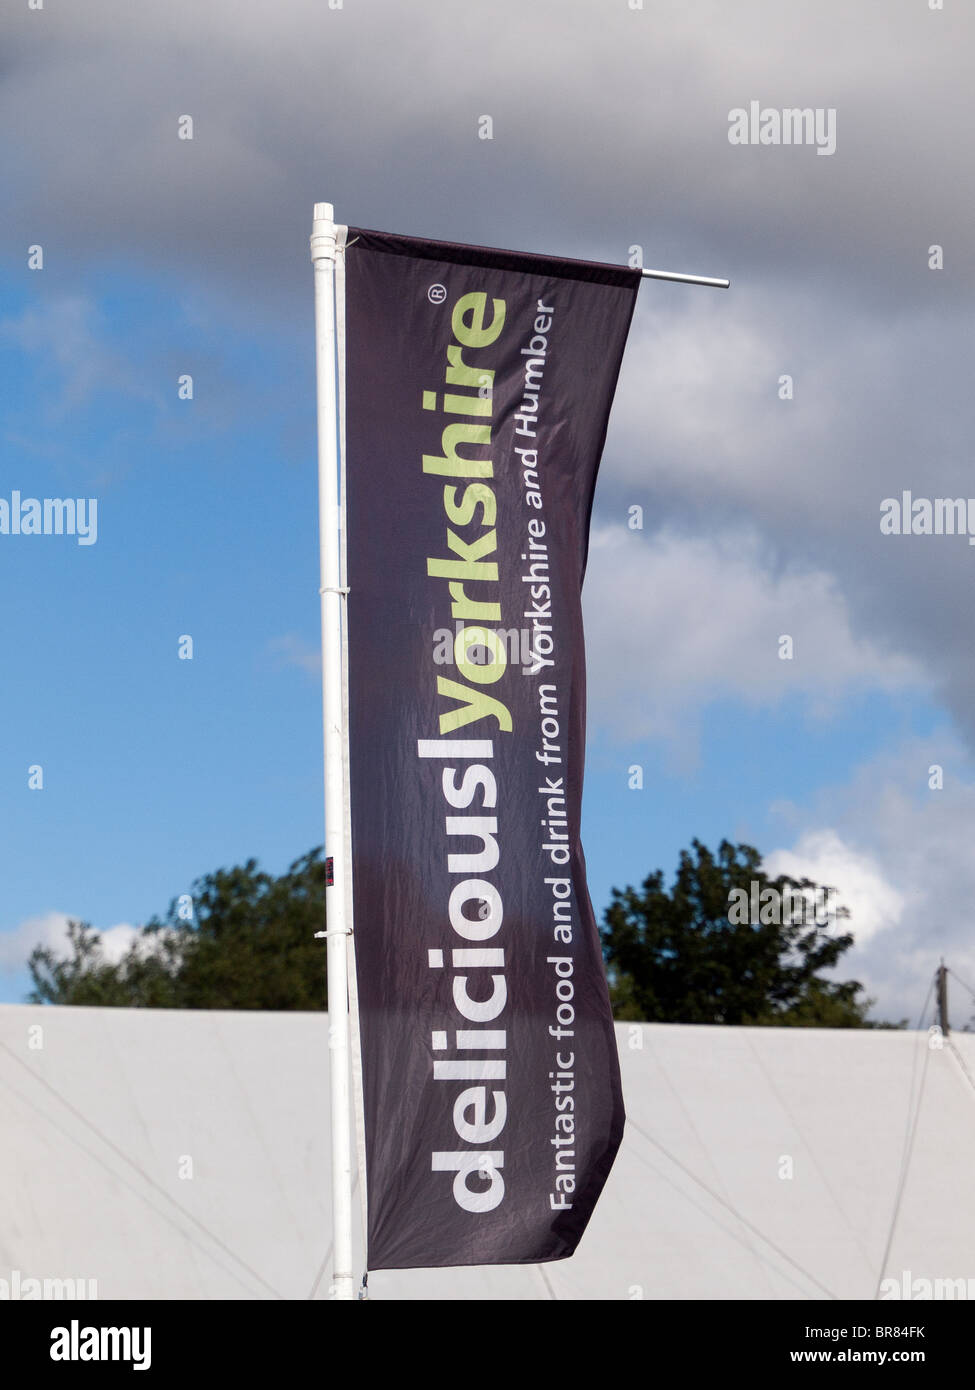 Flag with caption deliciouslYorkshire promoting local food at at Stokesley Agricultural Show 2010 Stock Photo